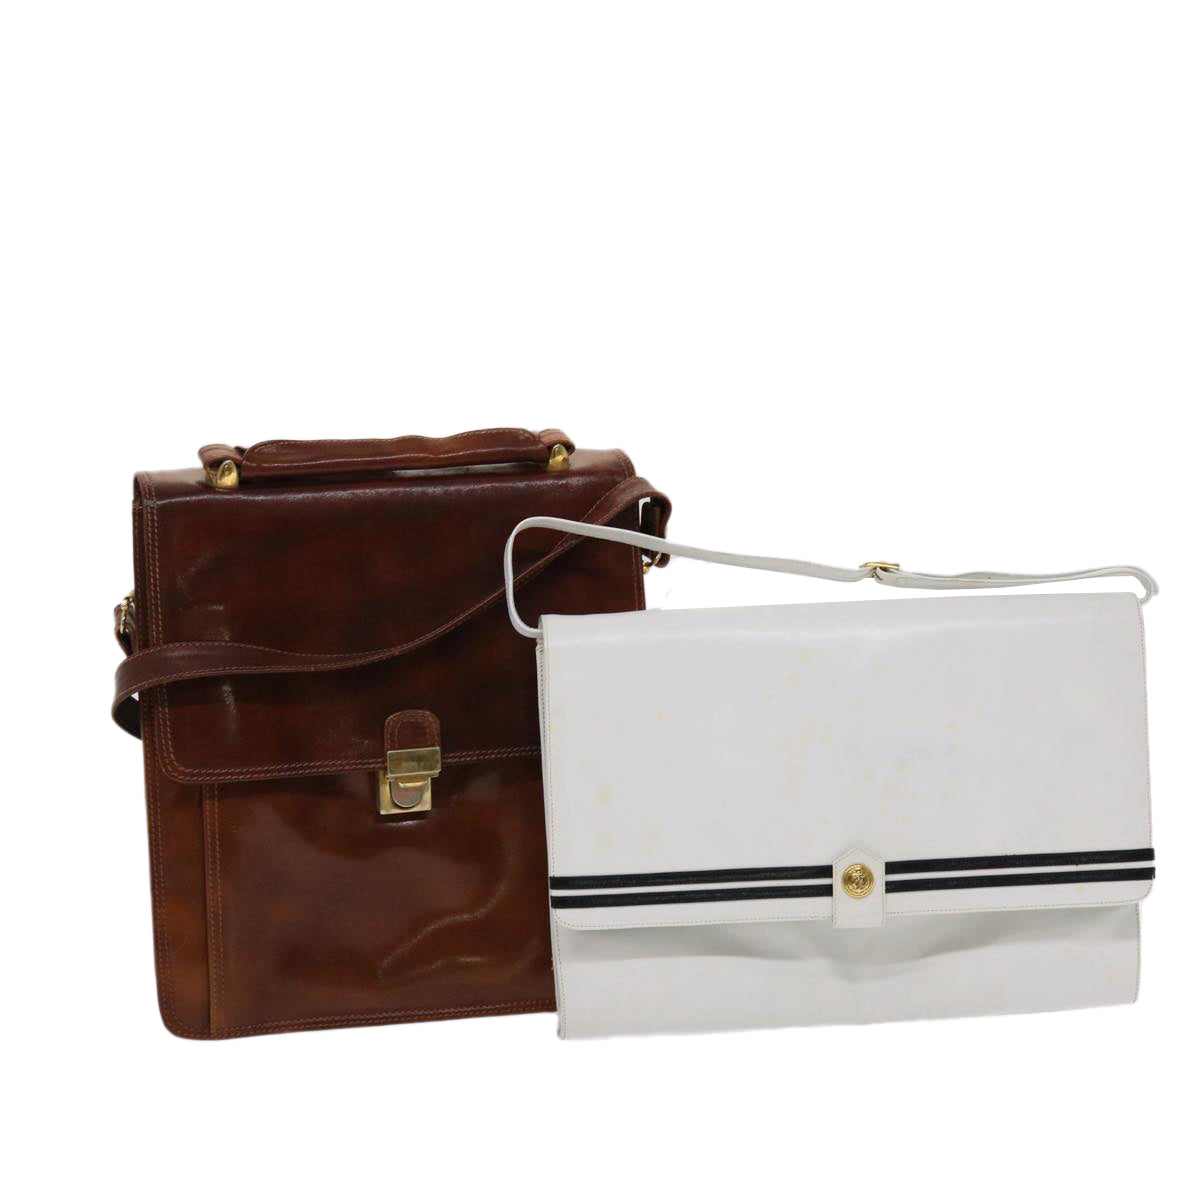 BALLY Shoulder Bag Leather 2Set Brown White Auth bs6514